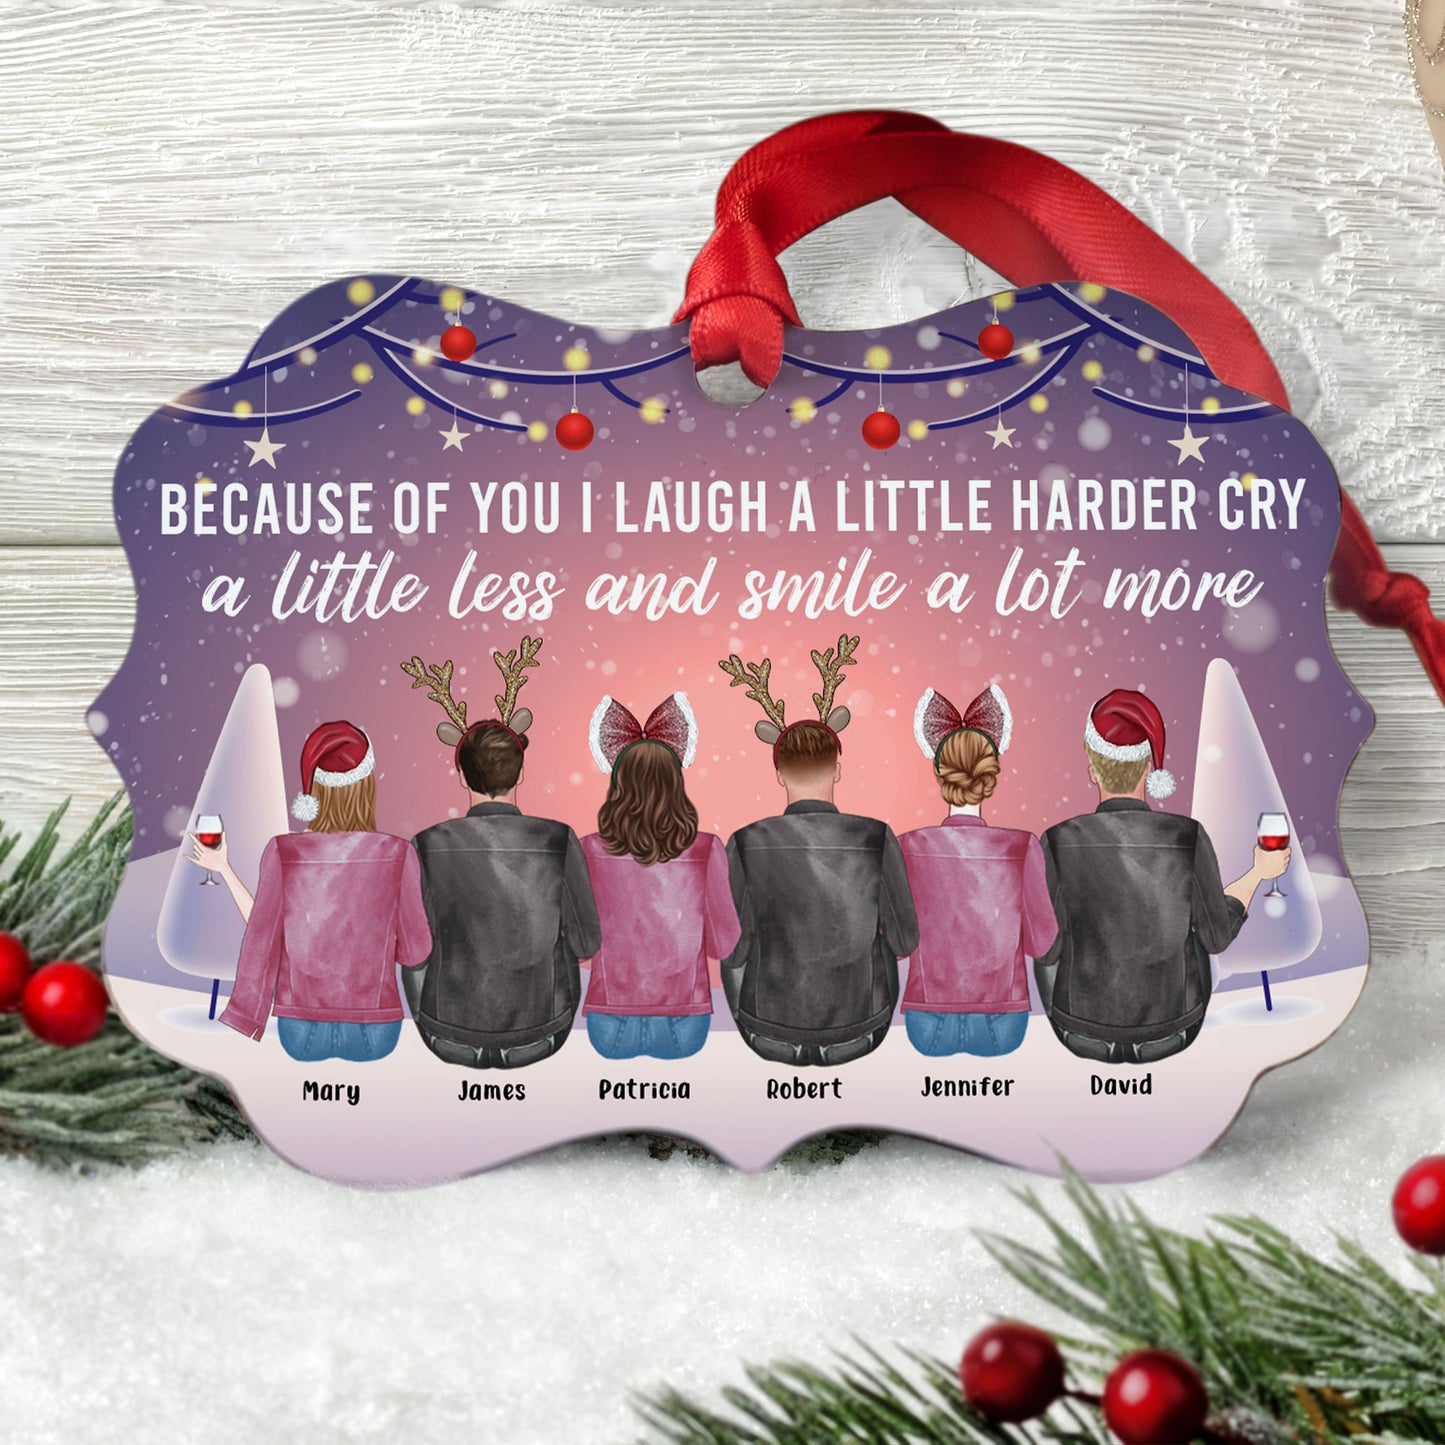 Because of You I Laugh a Little Harder - Personalized Aluminum Ornament - Christmas Gift For Sibling Ver 2